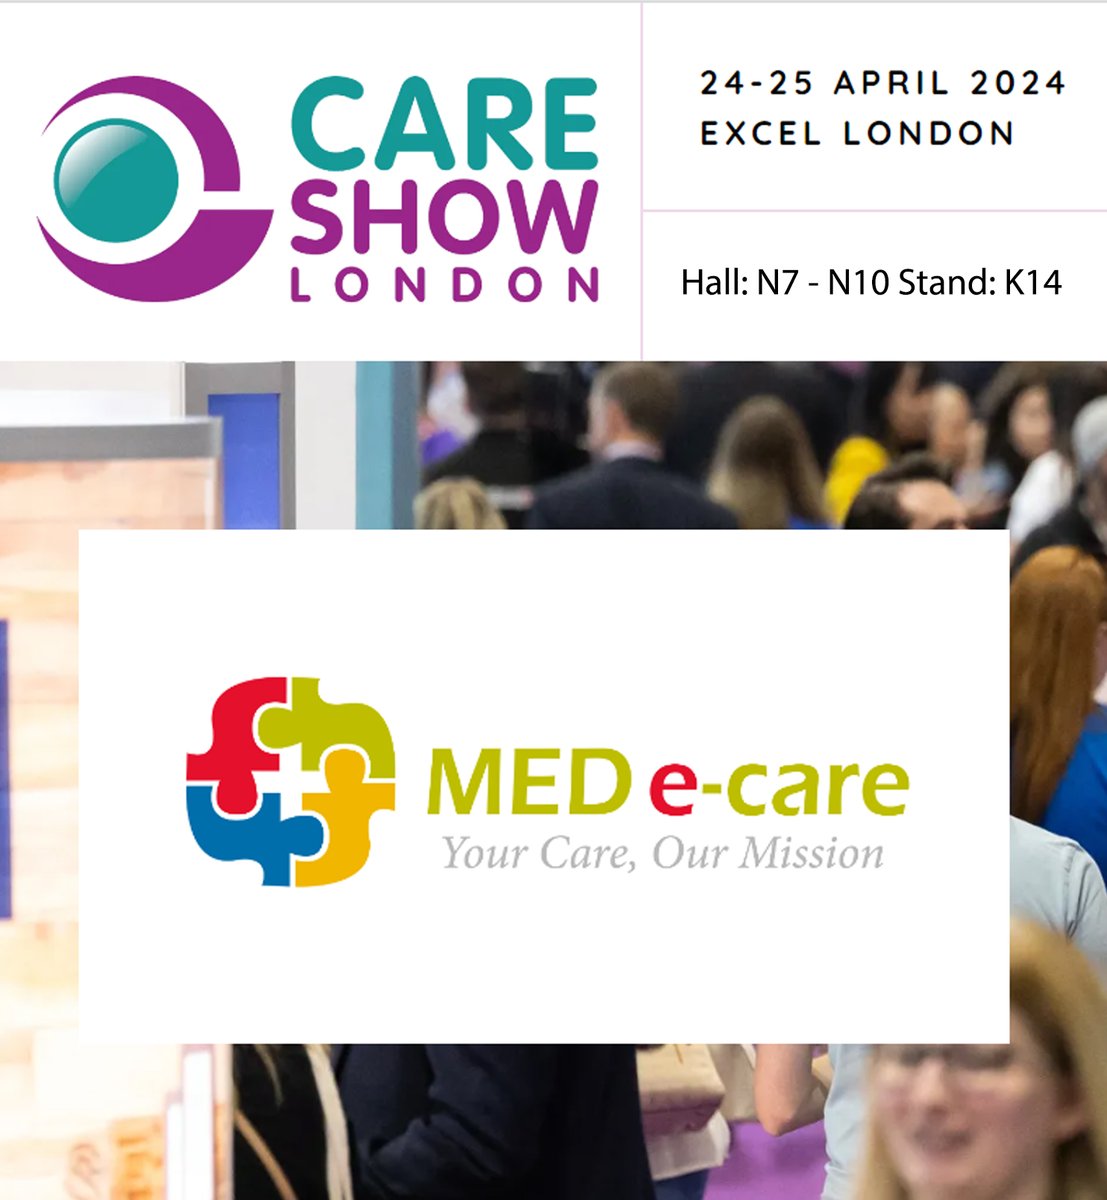 Are you going to the @CareShow London?

WHERE: London Excel
WHEN: 24-25 April 2024

Make sure you put a visit to stand K14 into your plans 😊 

#CareShow2024 #CareShowLondon